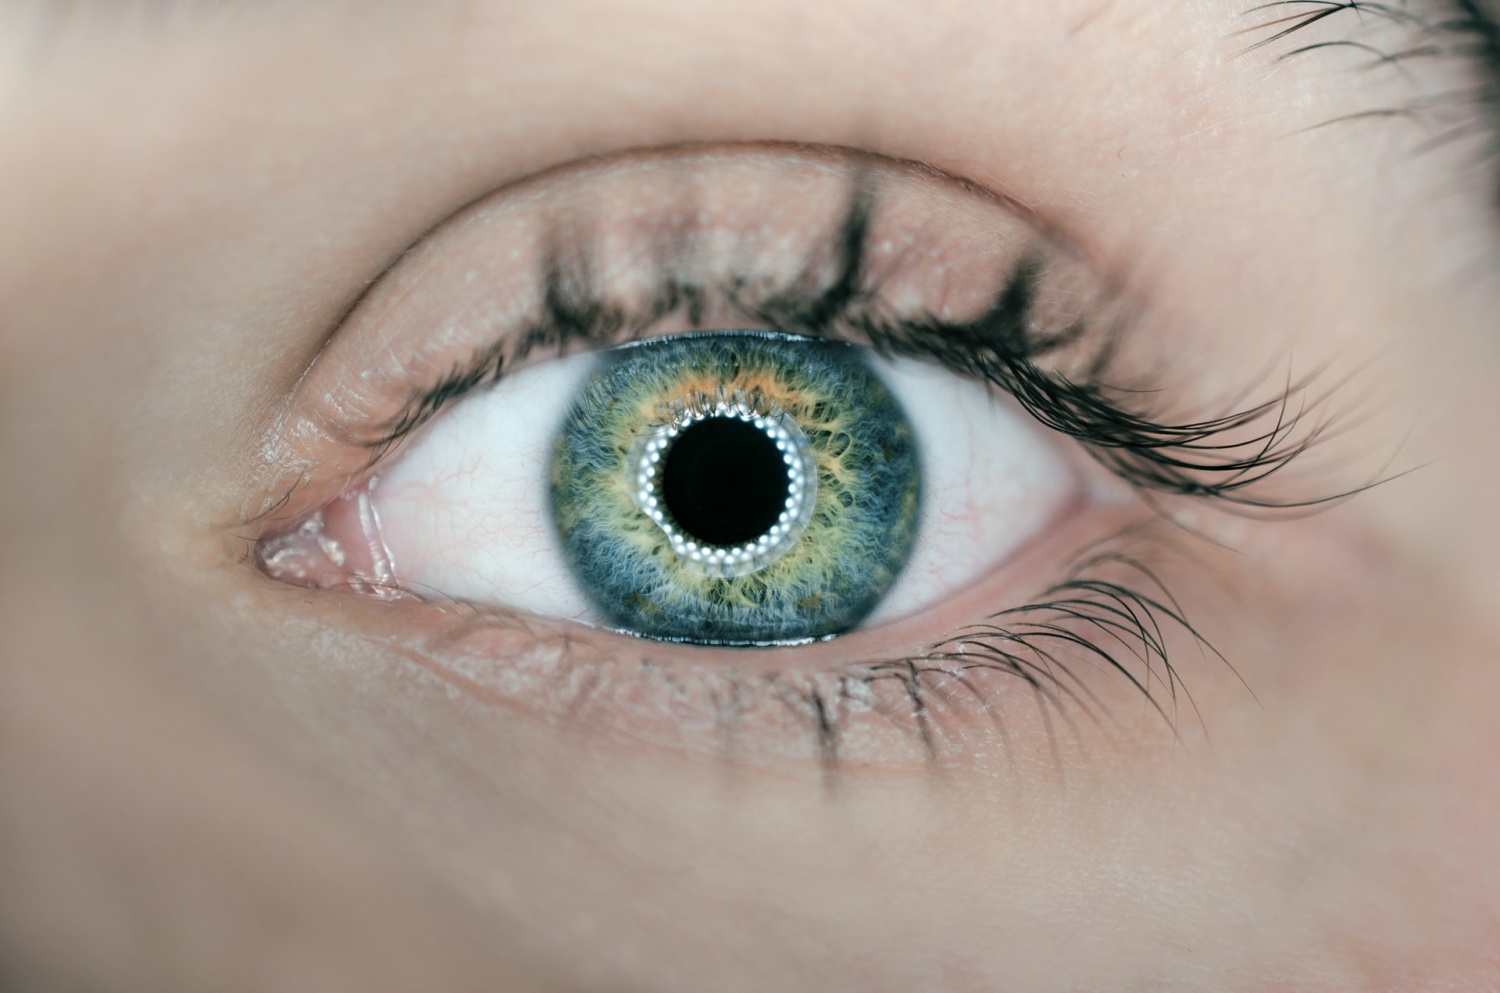 Eye Disease Treatment and Prevention Through Smart LED Contact Lenses: How Effective Is It?